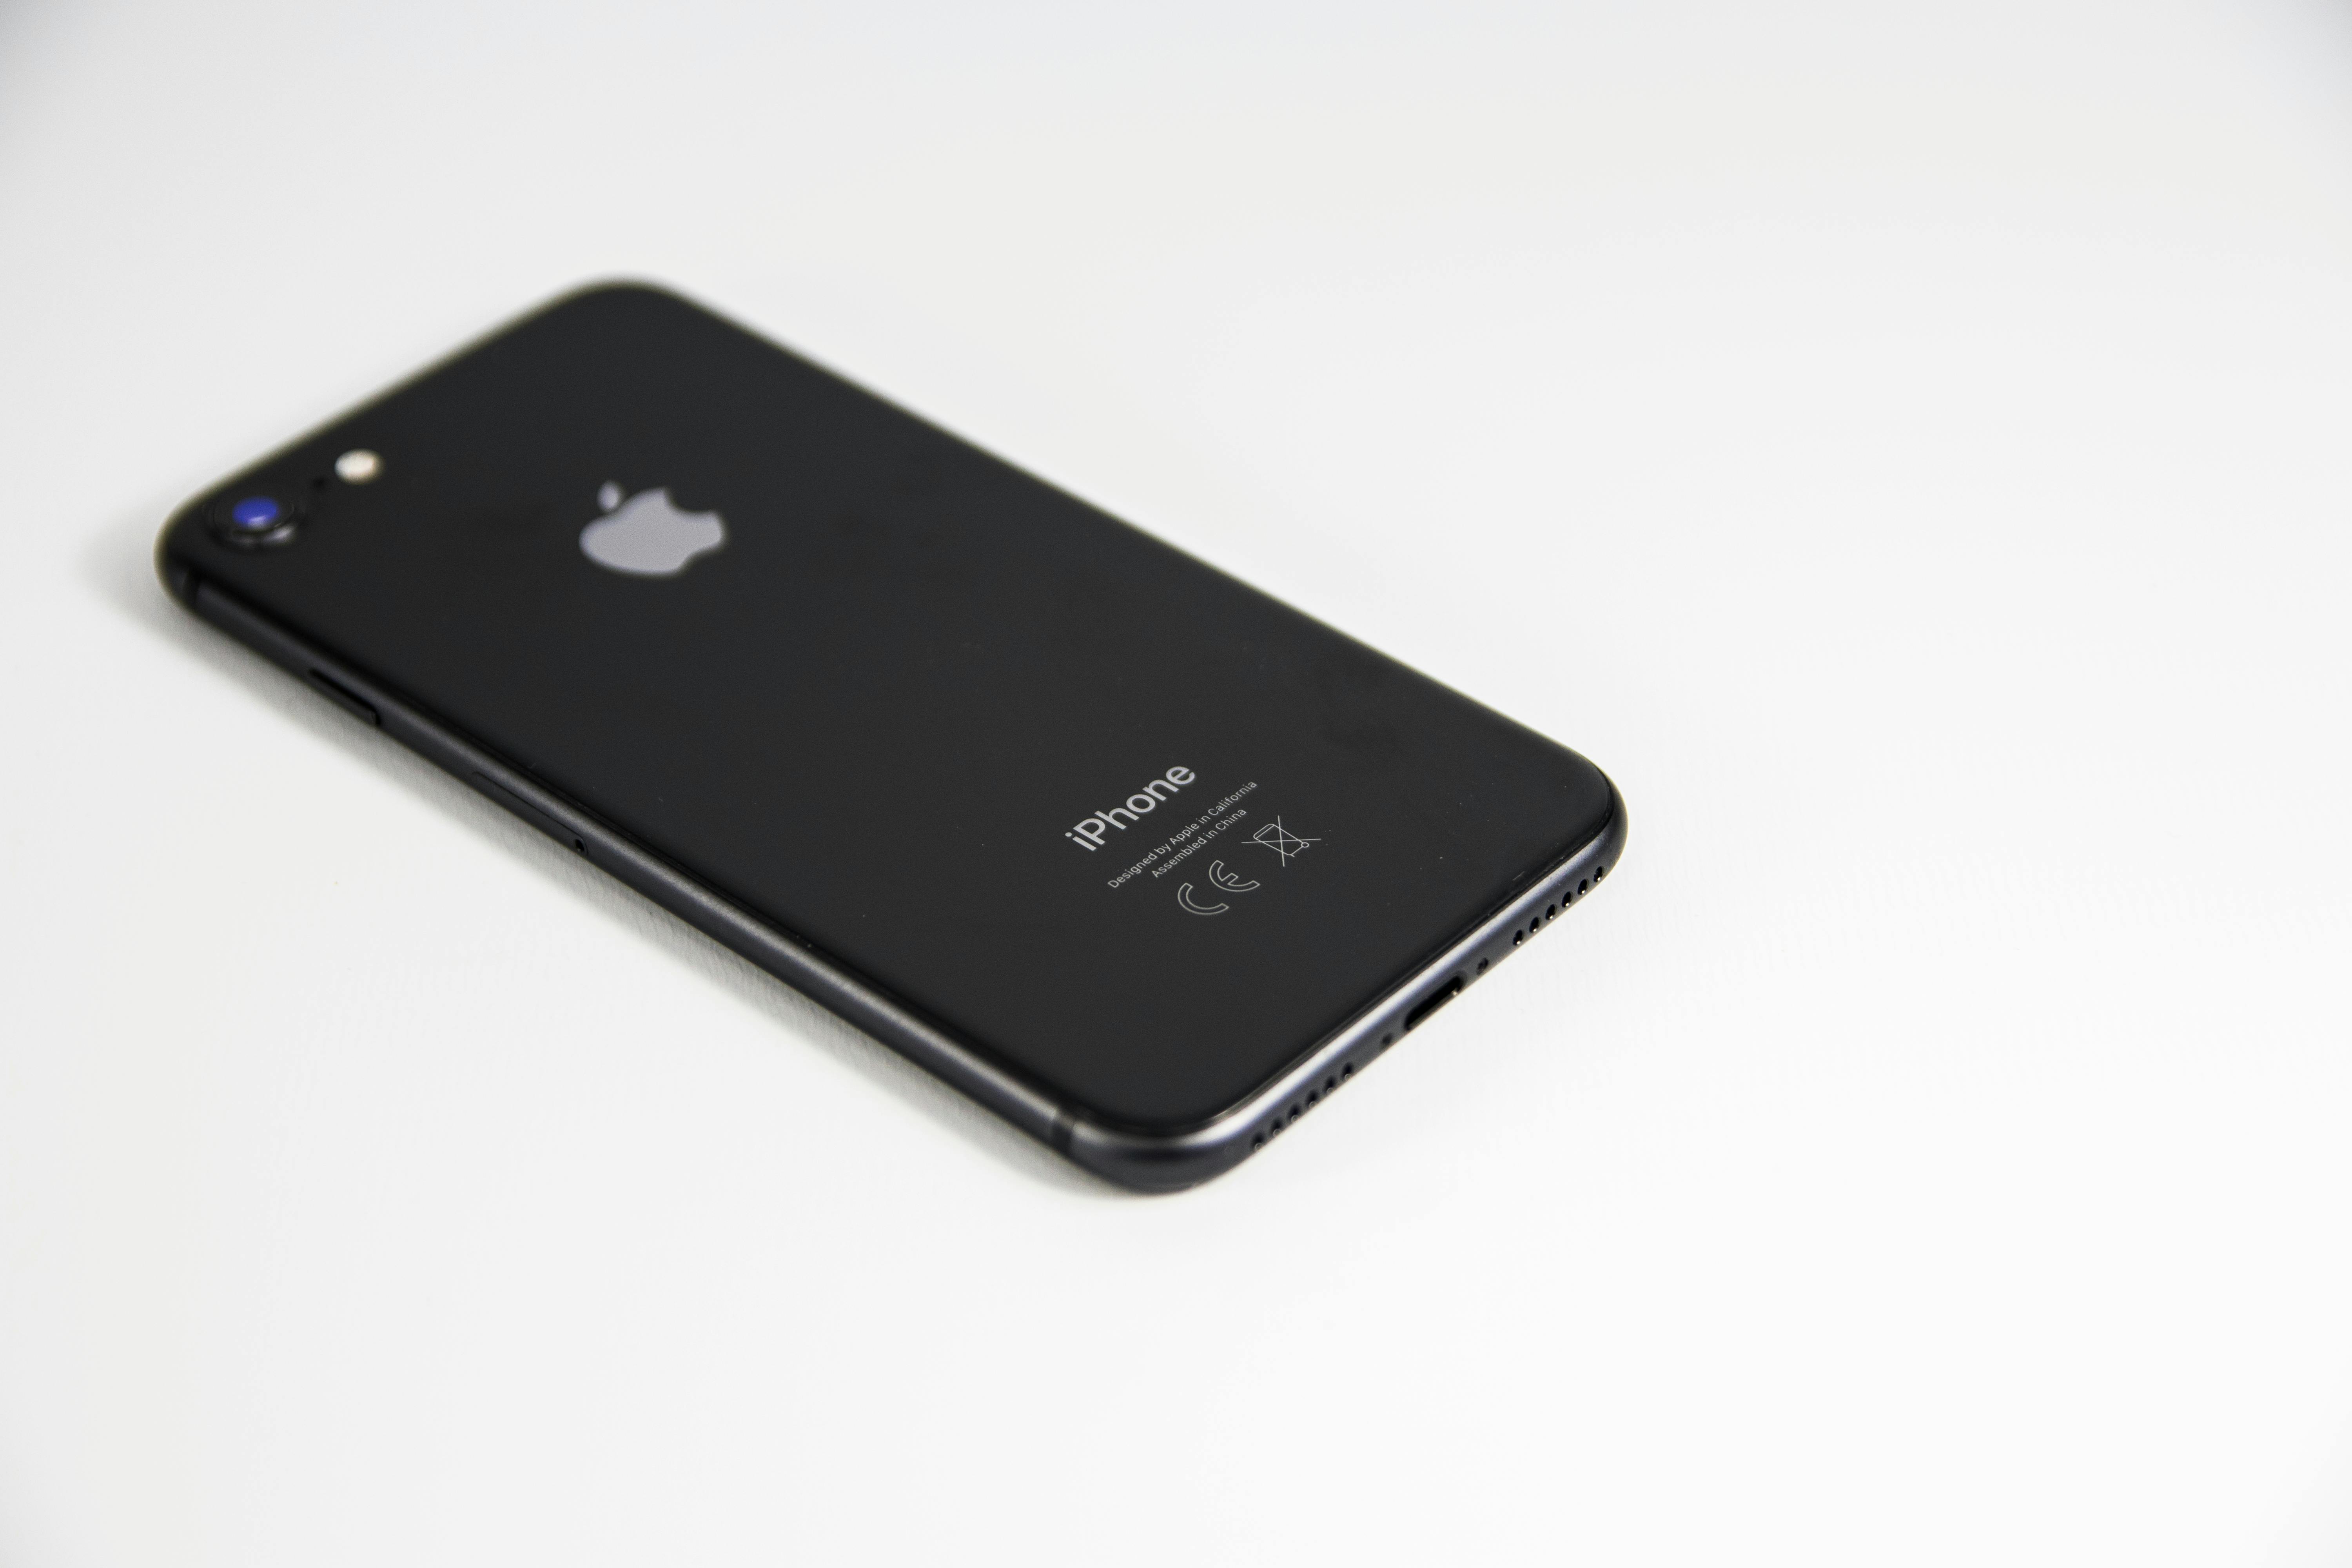 Space Gray Iphone 8 · Free Stock Photo